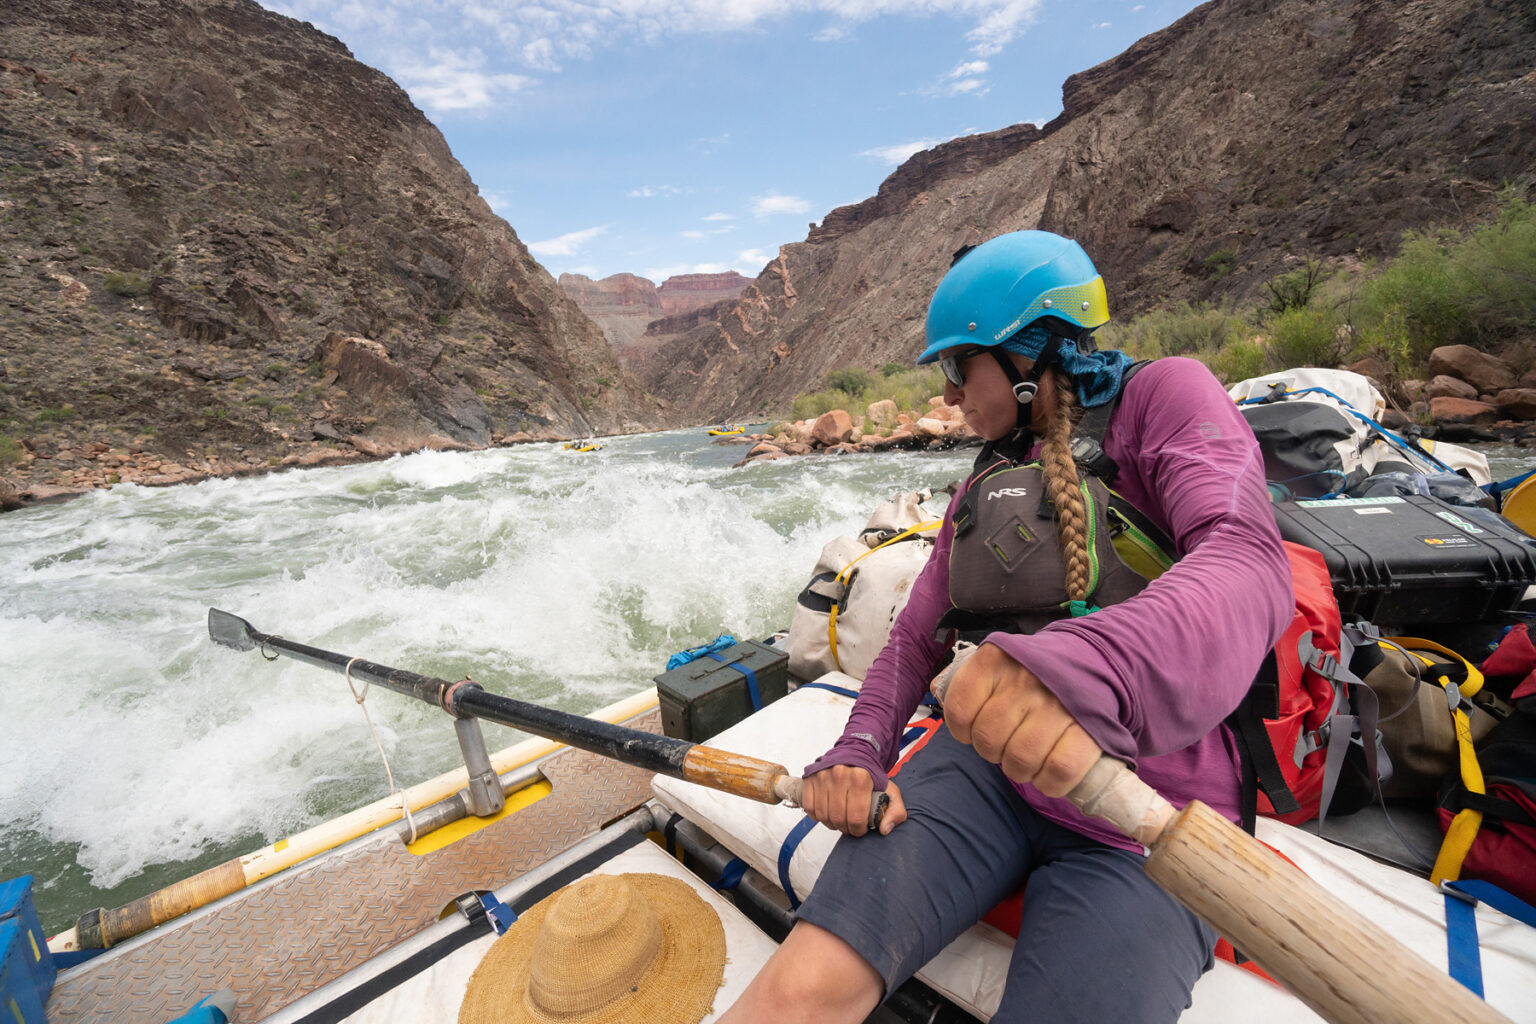 OARS guide in purple top and blue helmet rows her raft through big rapids in Grand Canyon